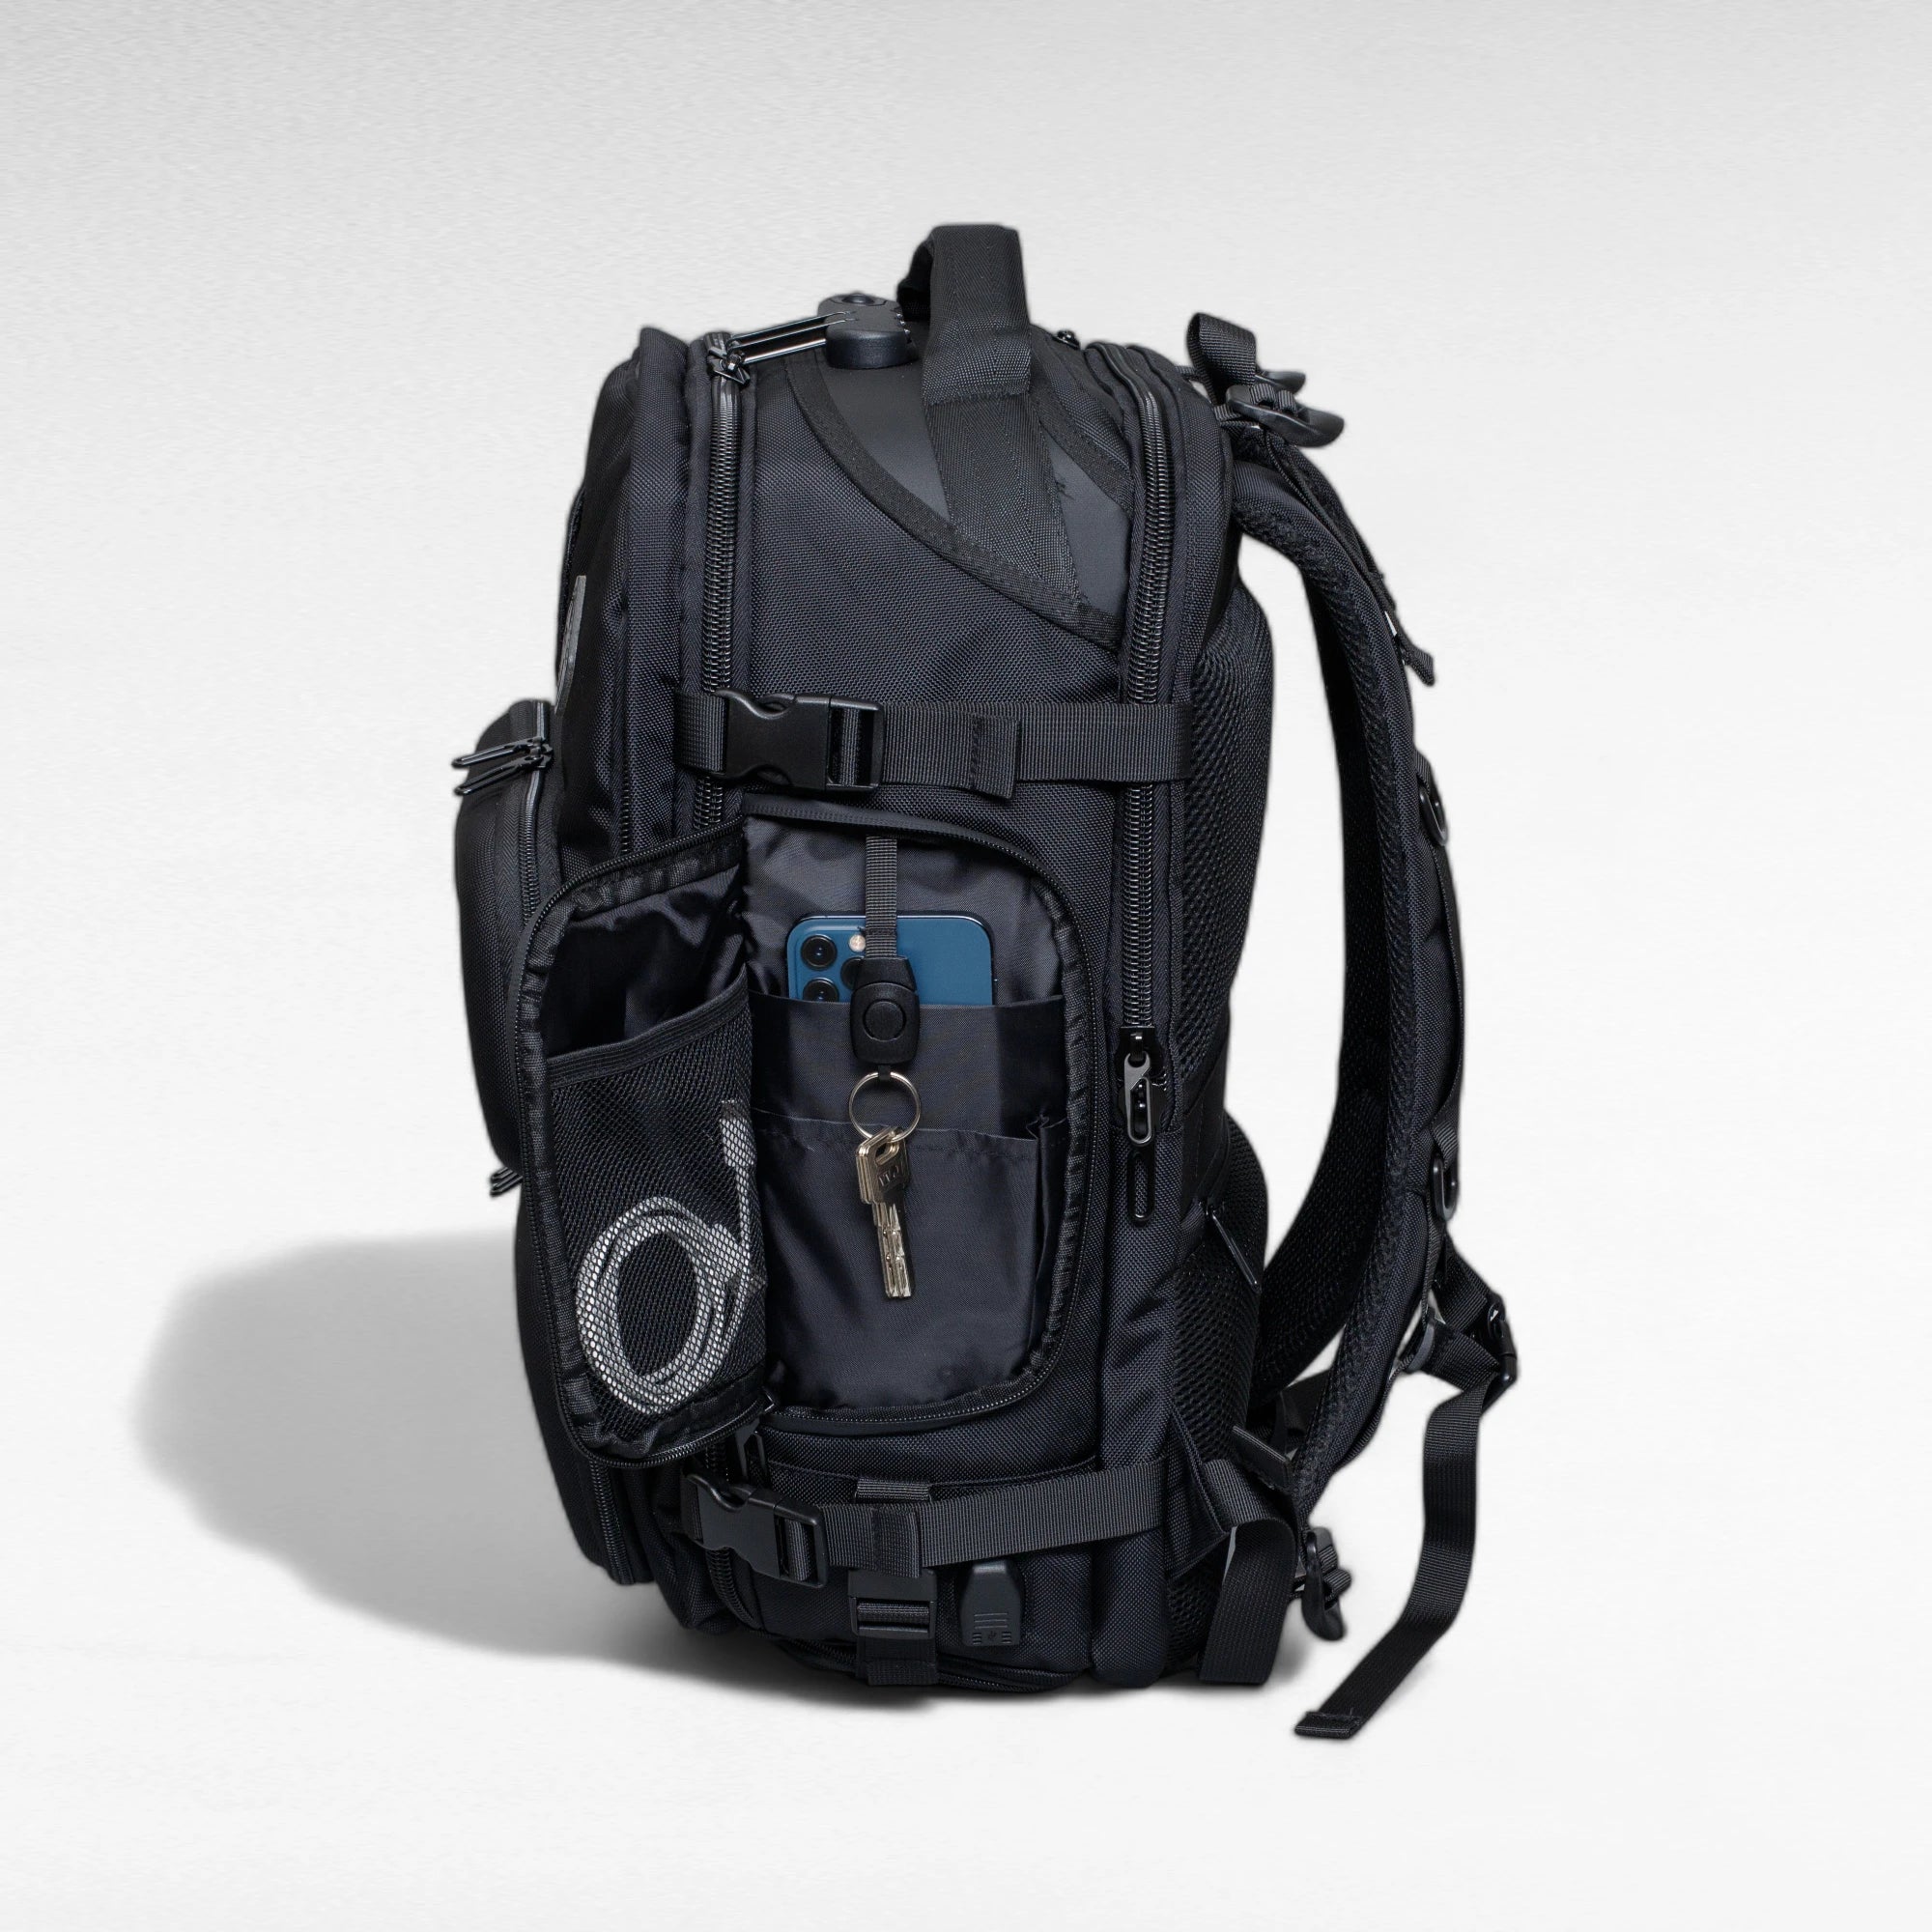 Oono | The Most Organized Gear for the Modern Traveller